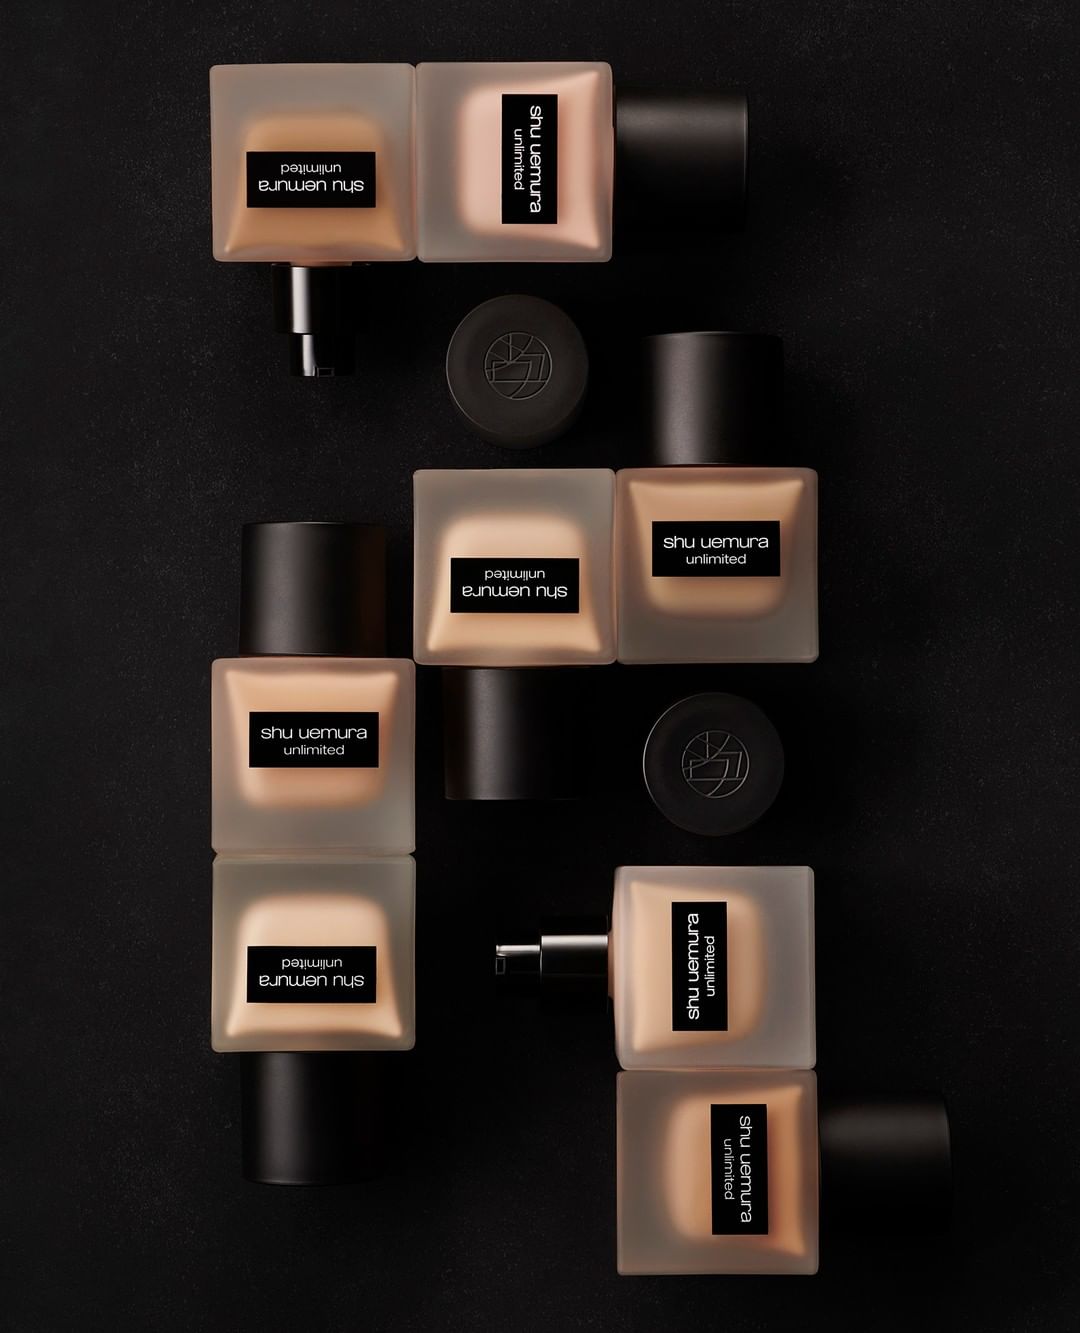 shu uemura - 25 unlimited shades that are undetectable thanks to our high-technology HVC system and long-time expertise in the diversity of Asian skin tones. #shuuemura #shuartistry #unlimitedfoundati...